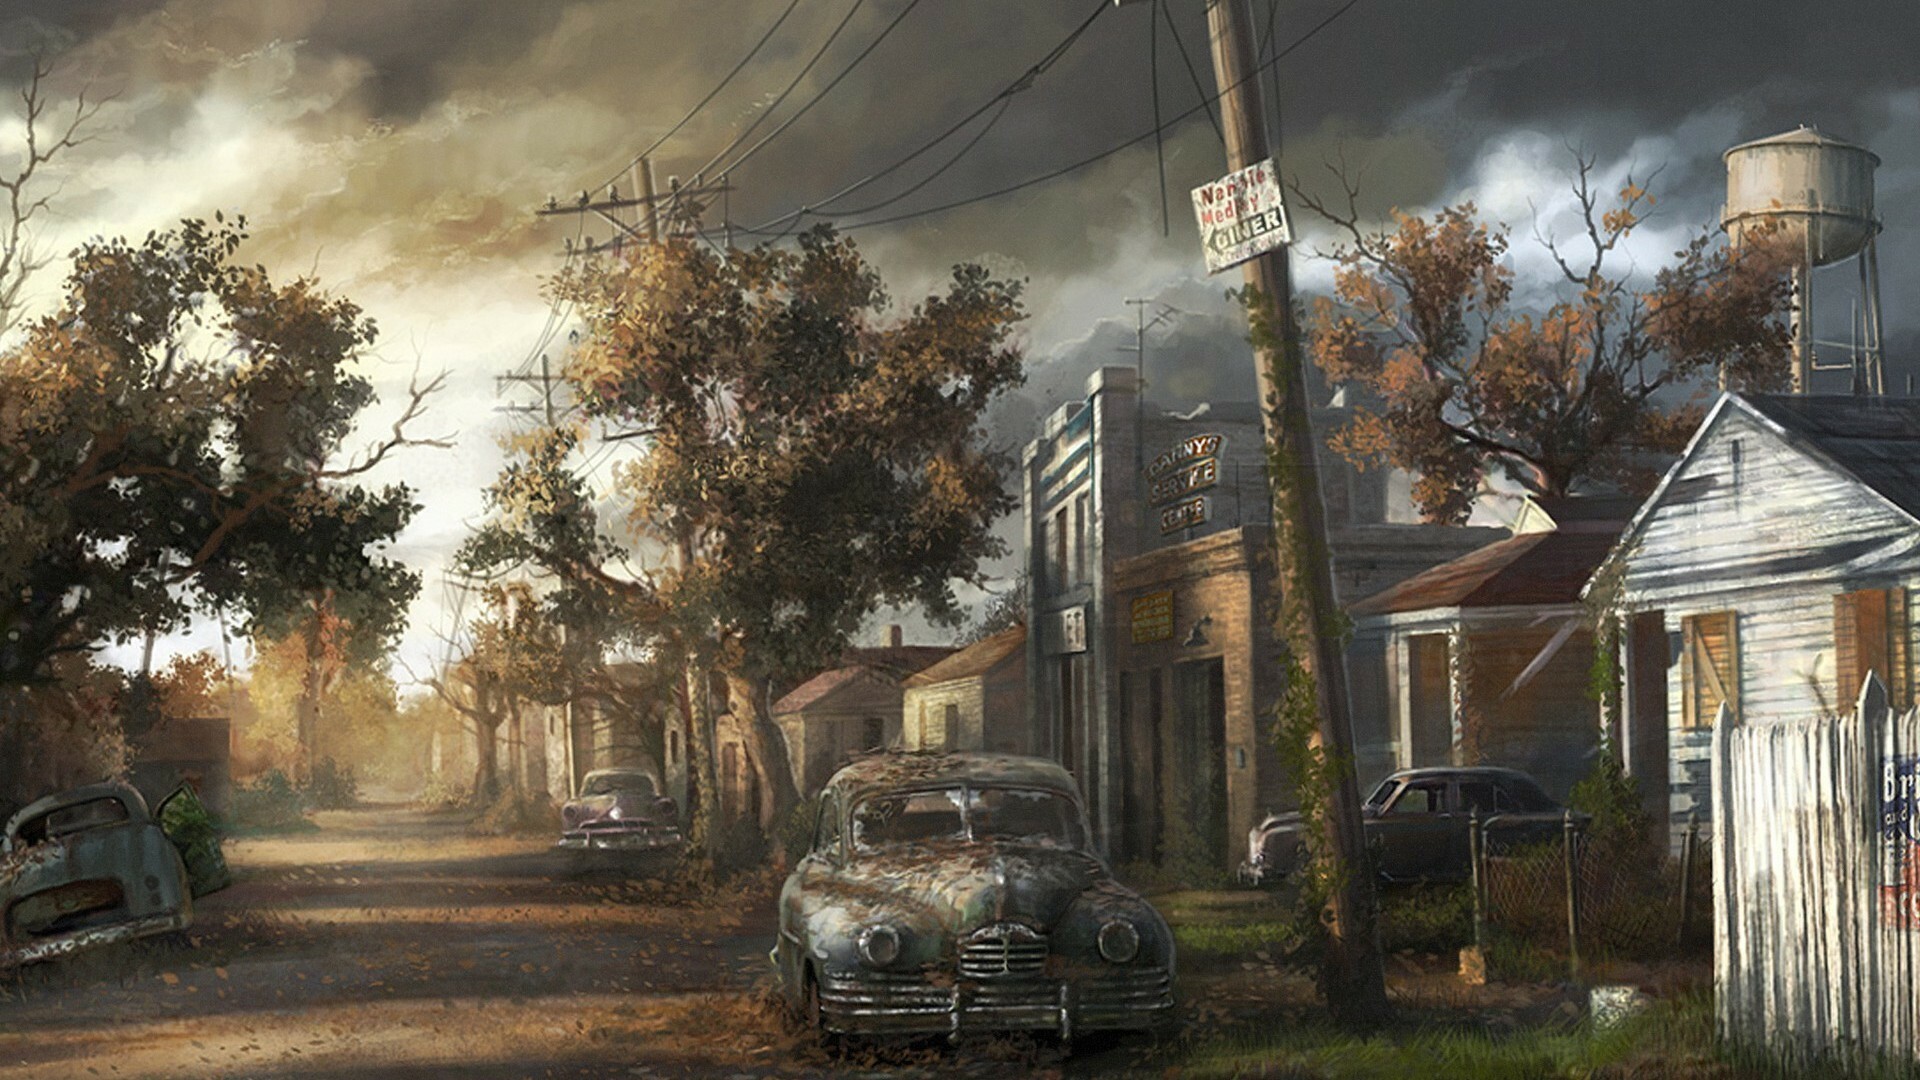 Post-apocalypse: Deserted buildings tumbling into ruins, Abandoned cars. 1920x1080 Full HD Background.